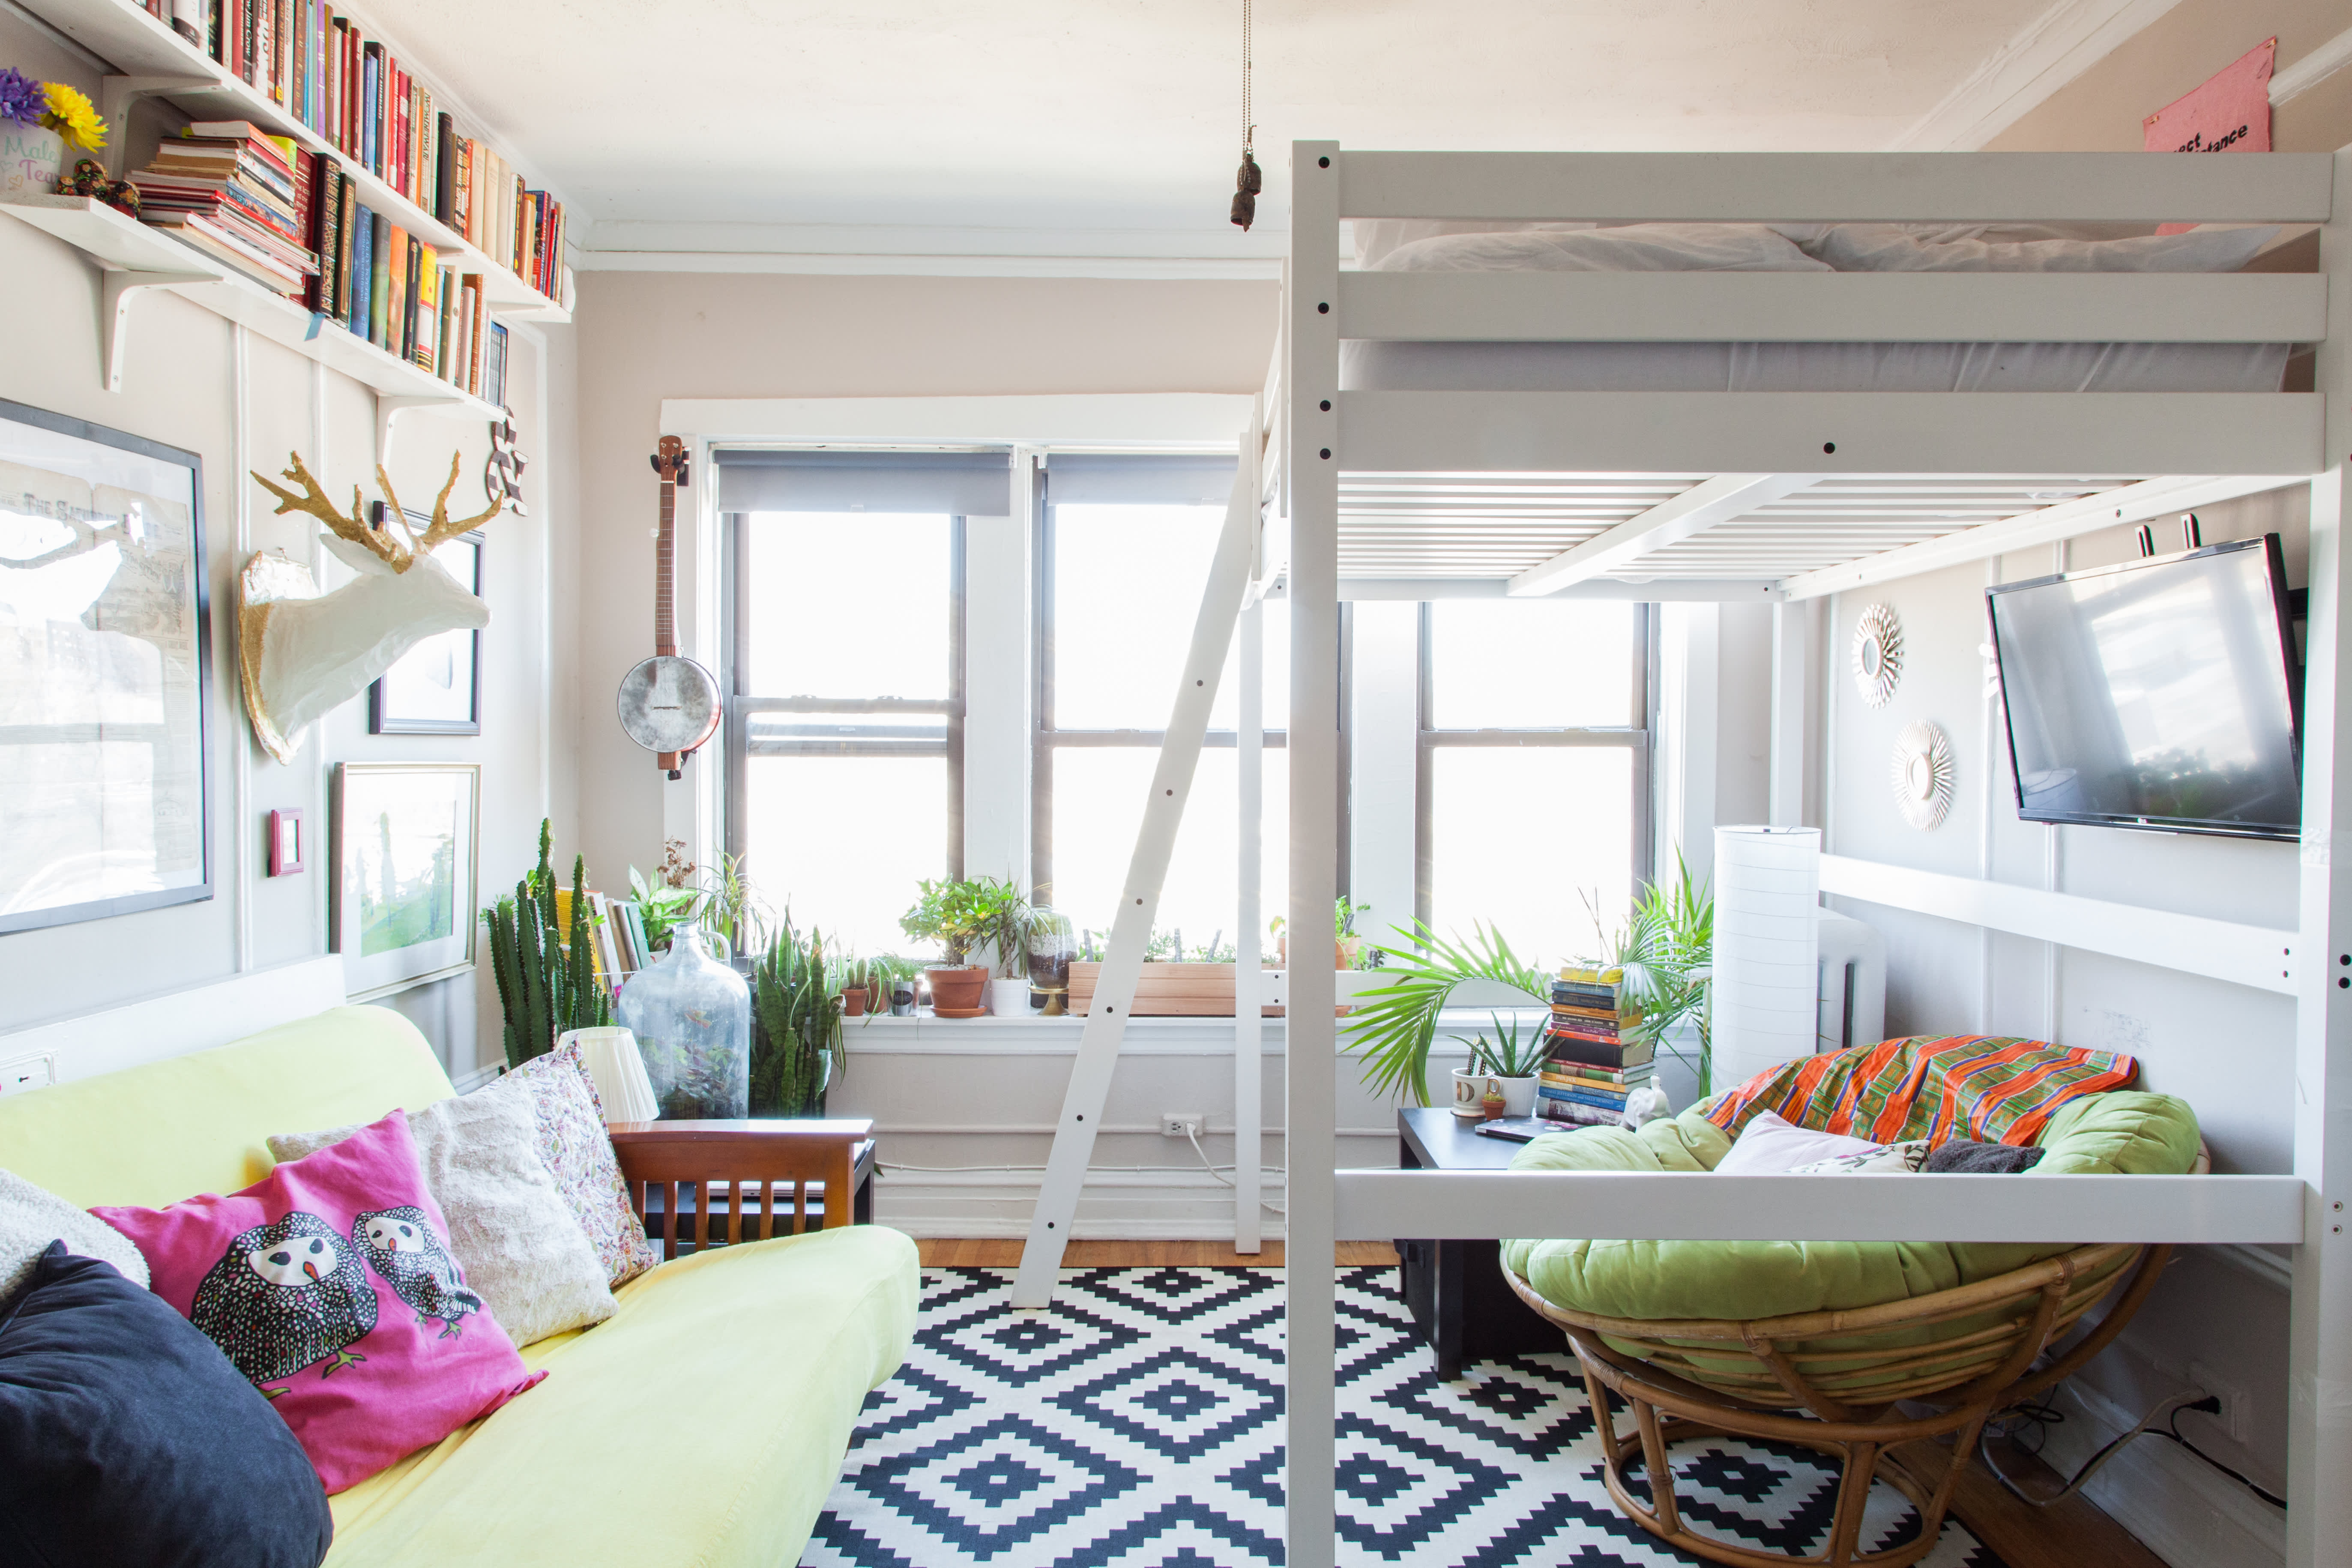 How To Maximize Space in a Small Apartment: 7 Tips